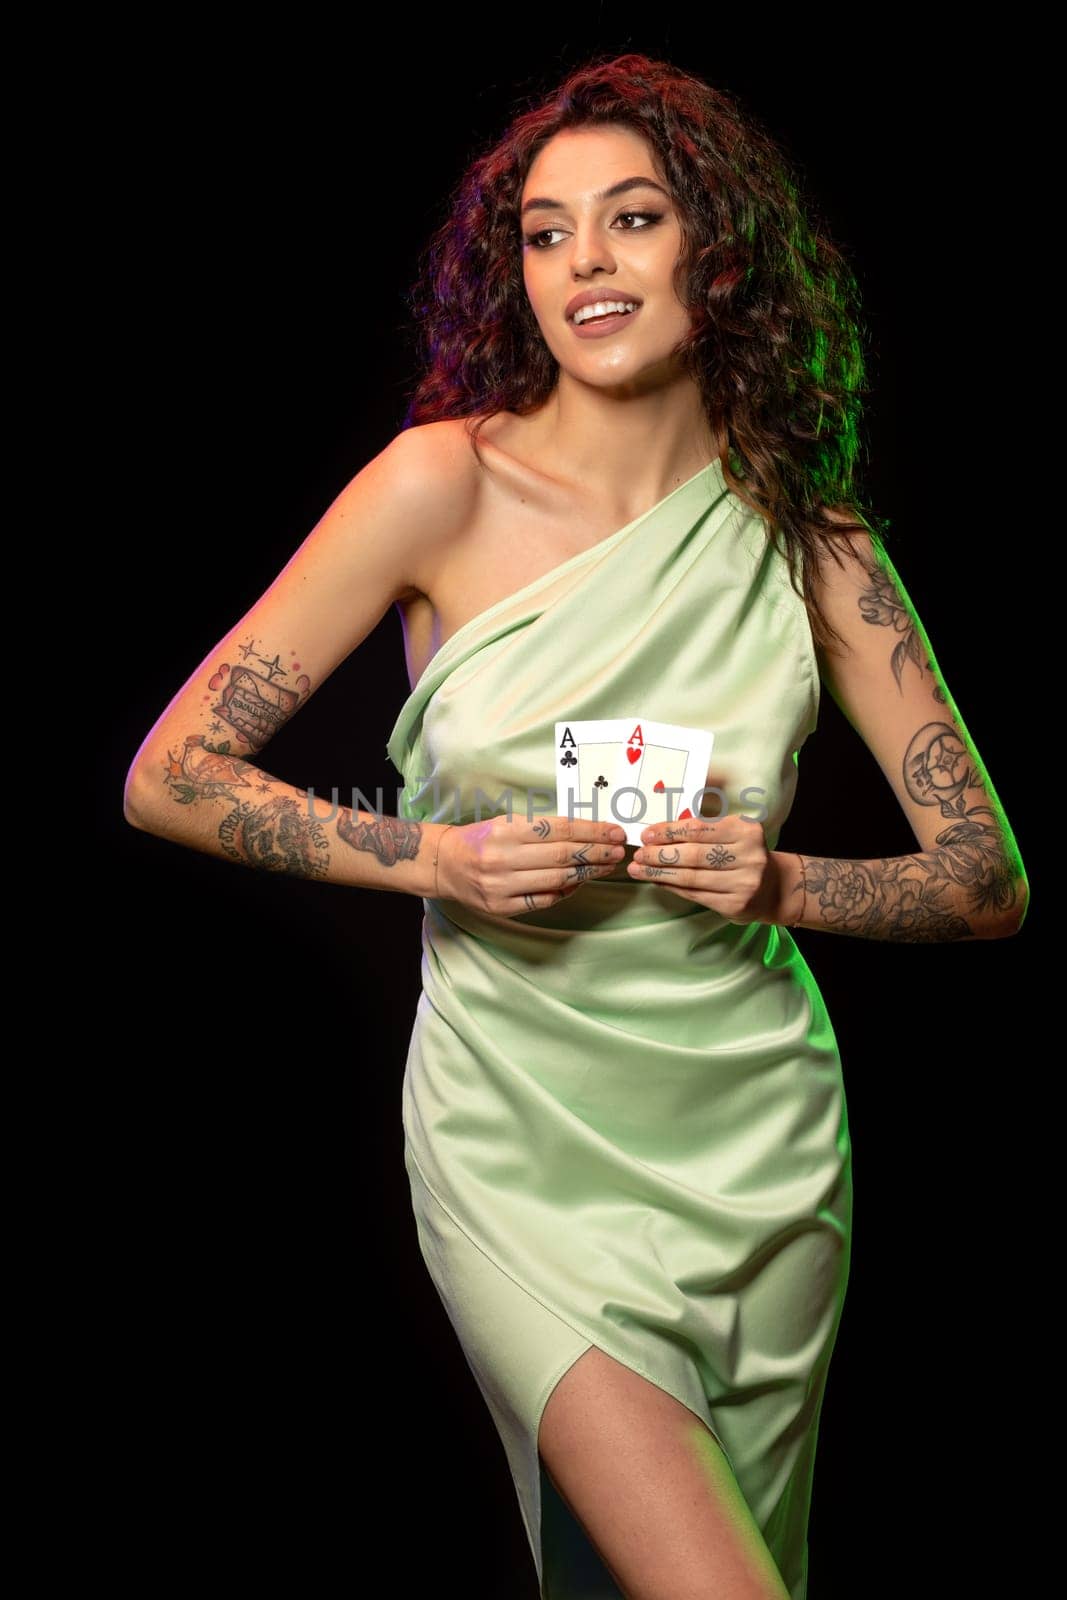 Smiling gambling attractive young woman in light green silk dress with tattoo on arm holding winning set of two aces cards posing against black background. Poker game concept